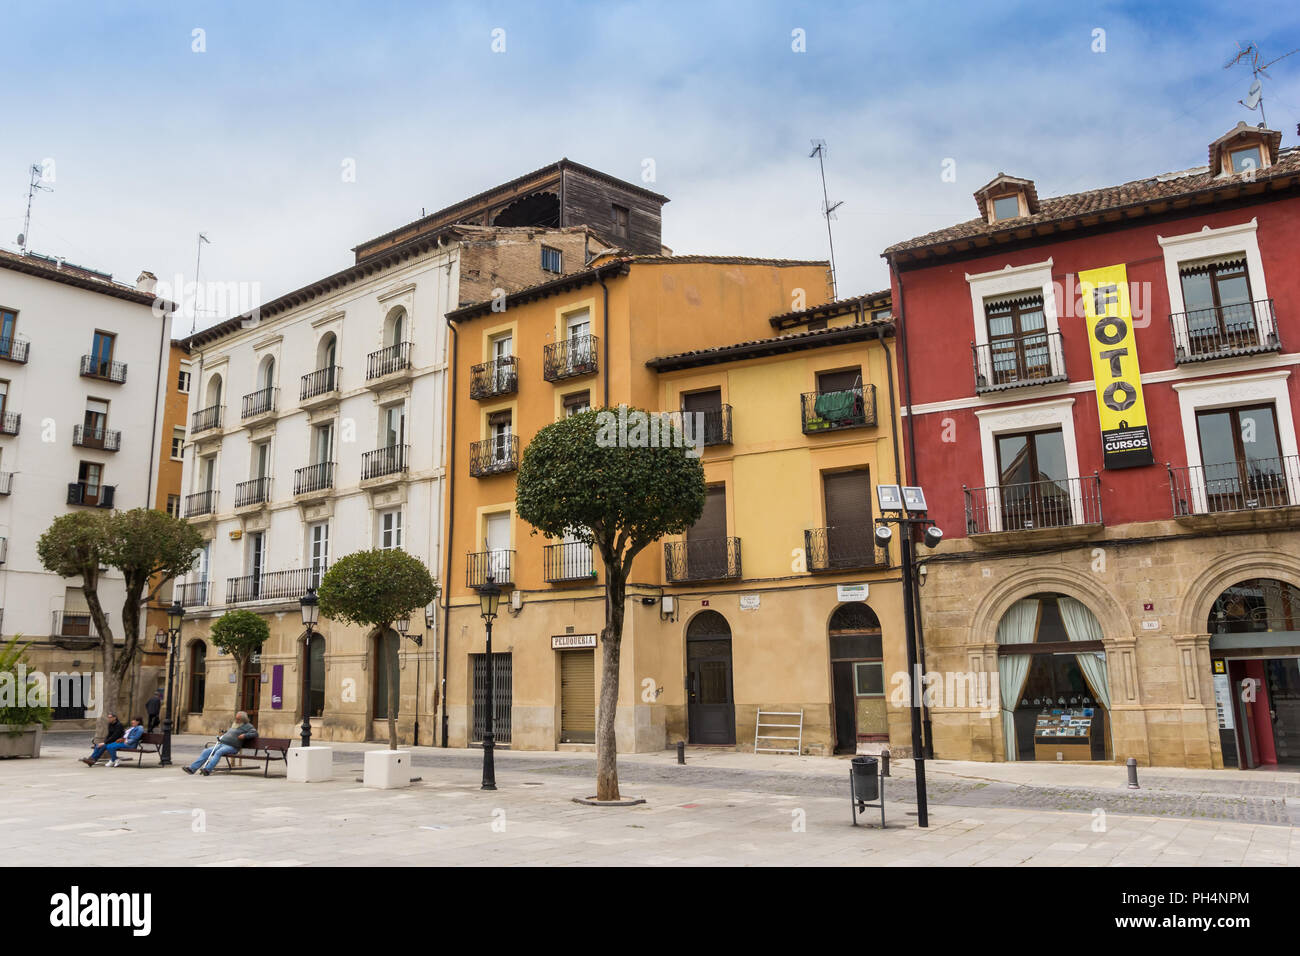 Colorful houses at the market square of Logrono, Spain Stock Photo